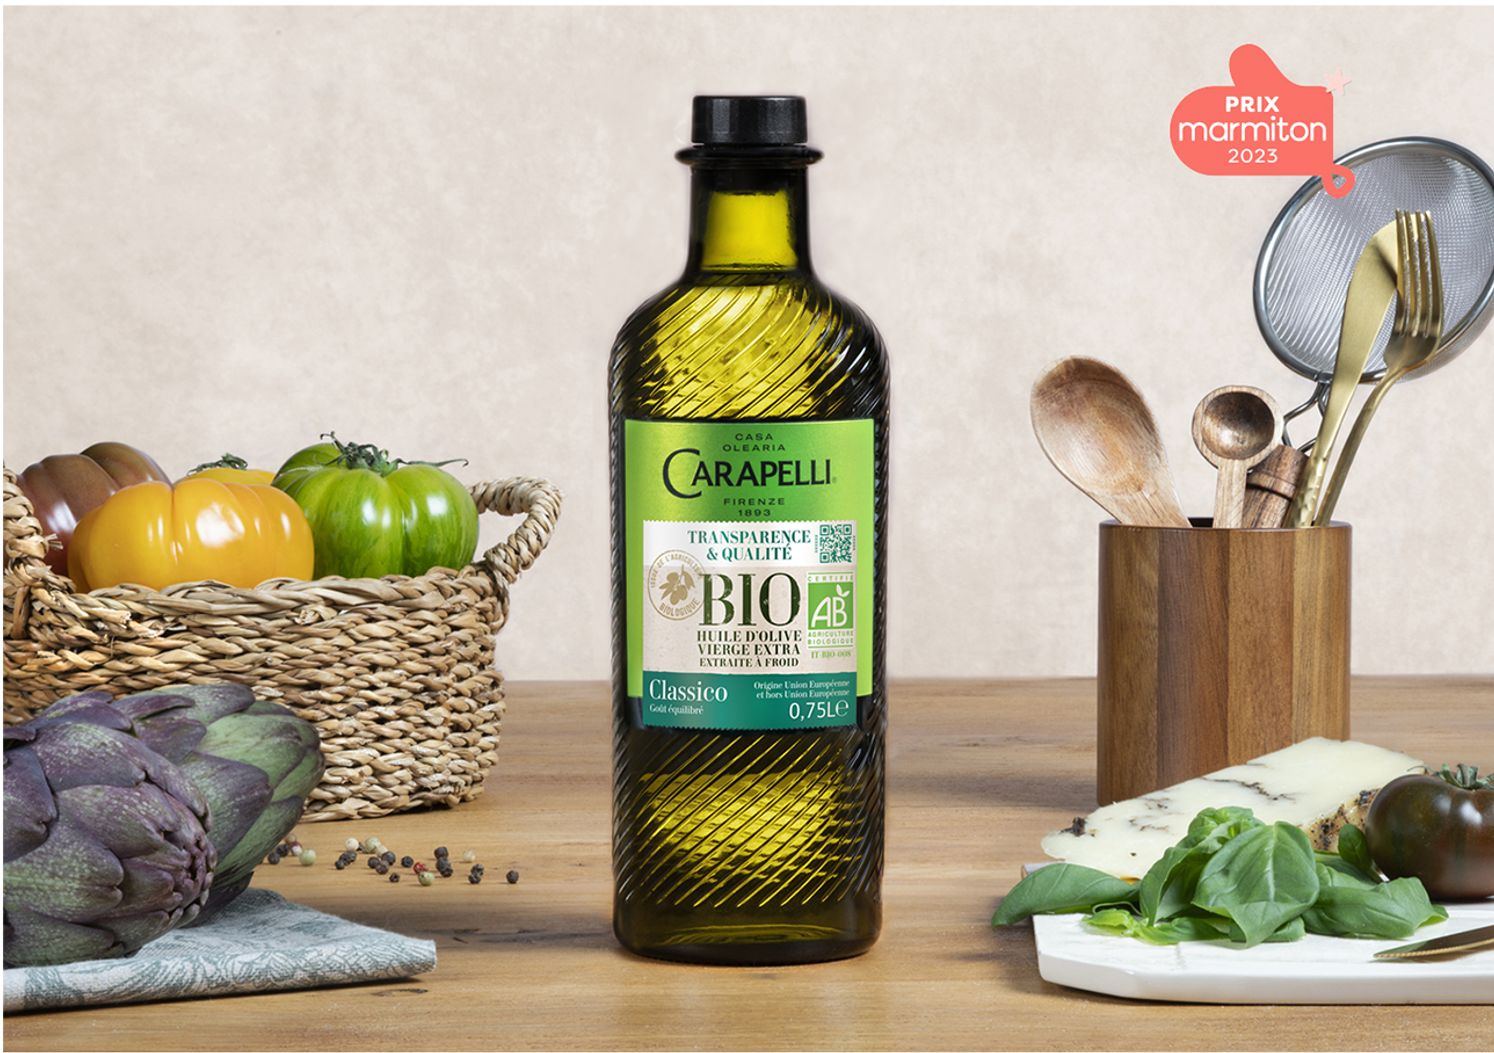 Huile d'olive BIO - Vierge extra